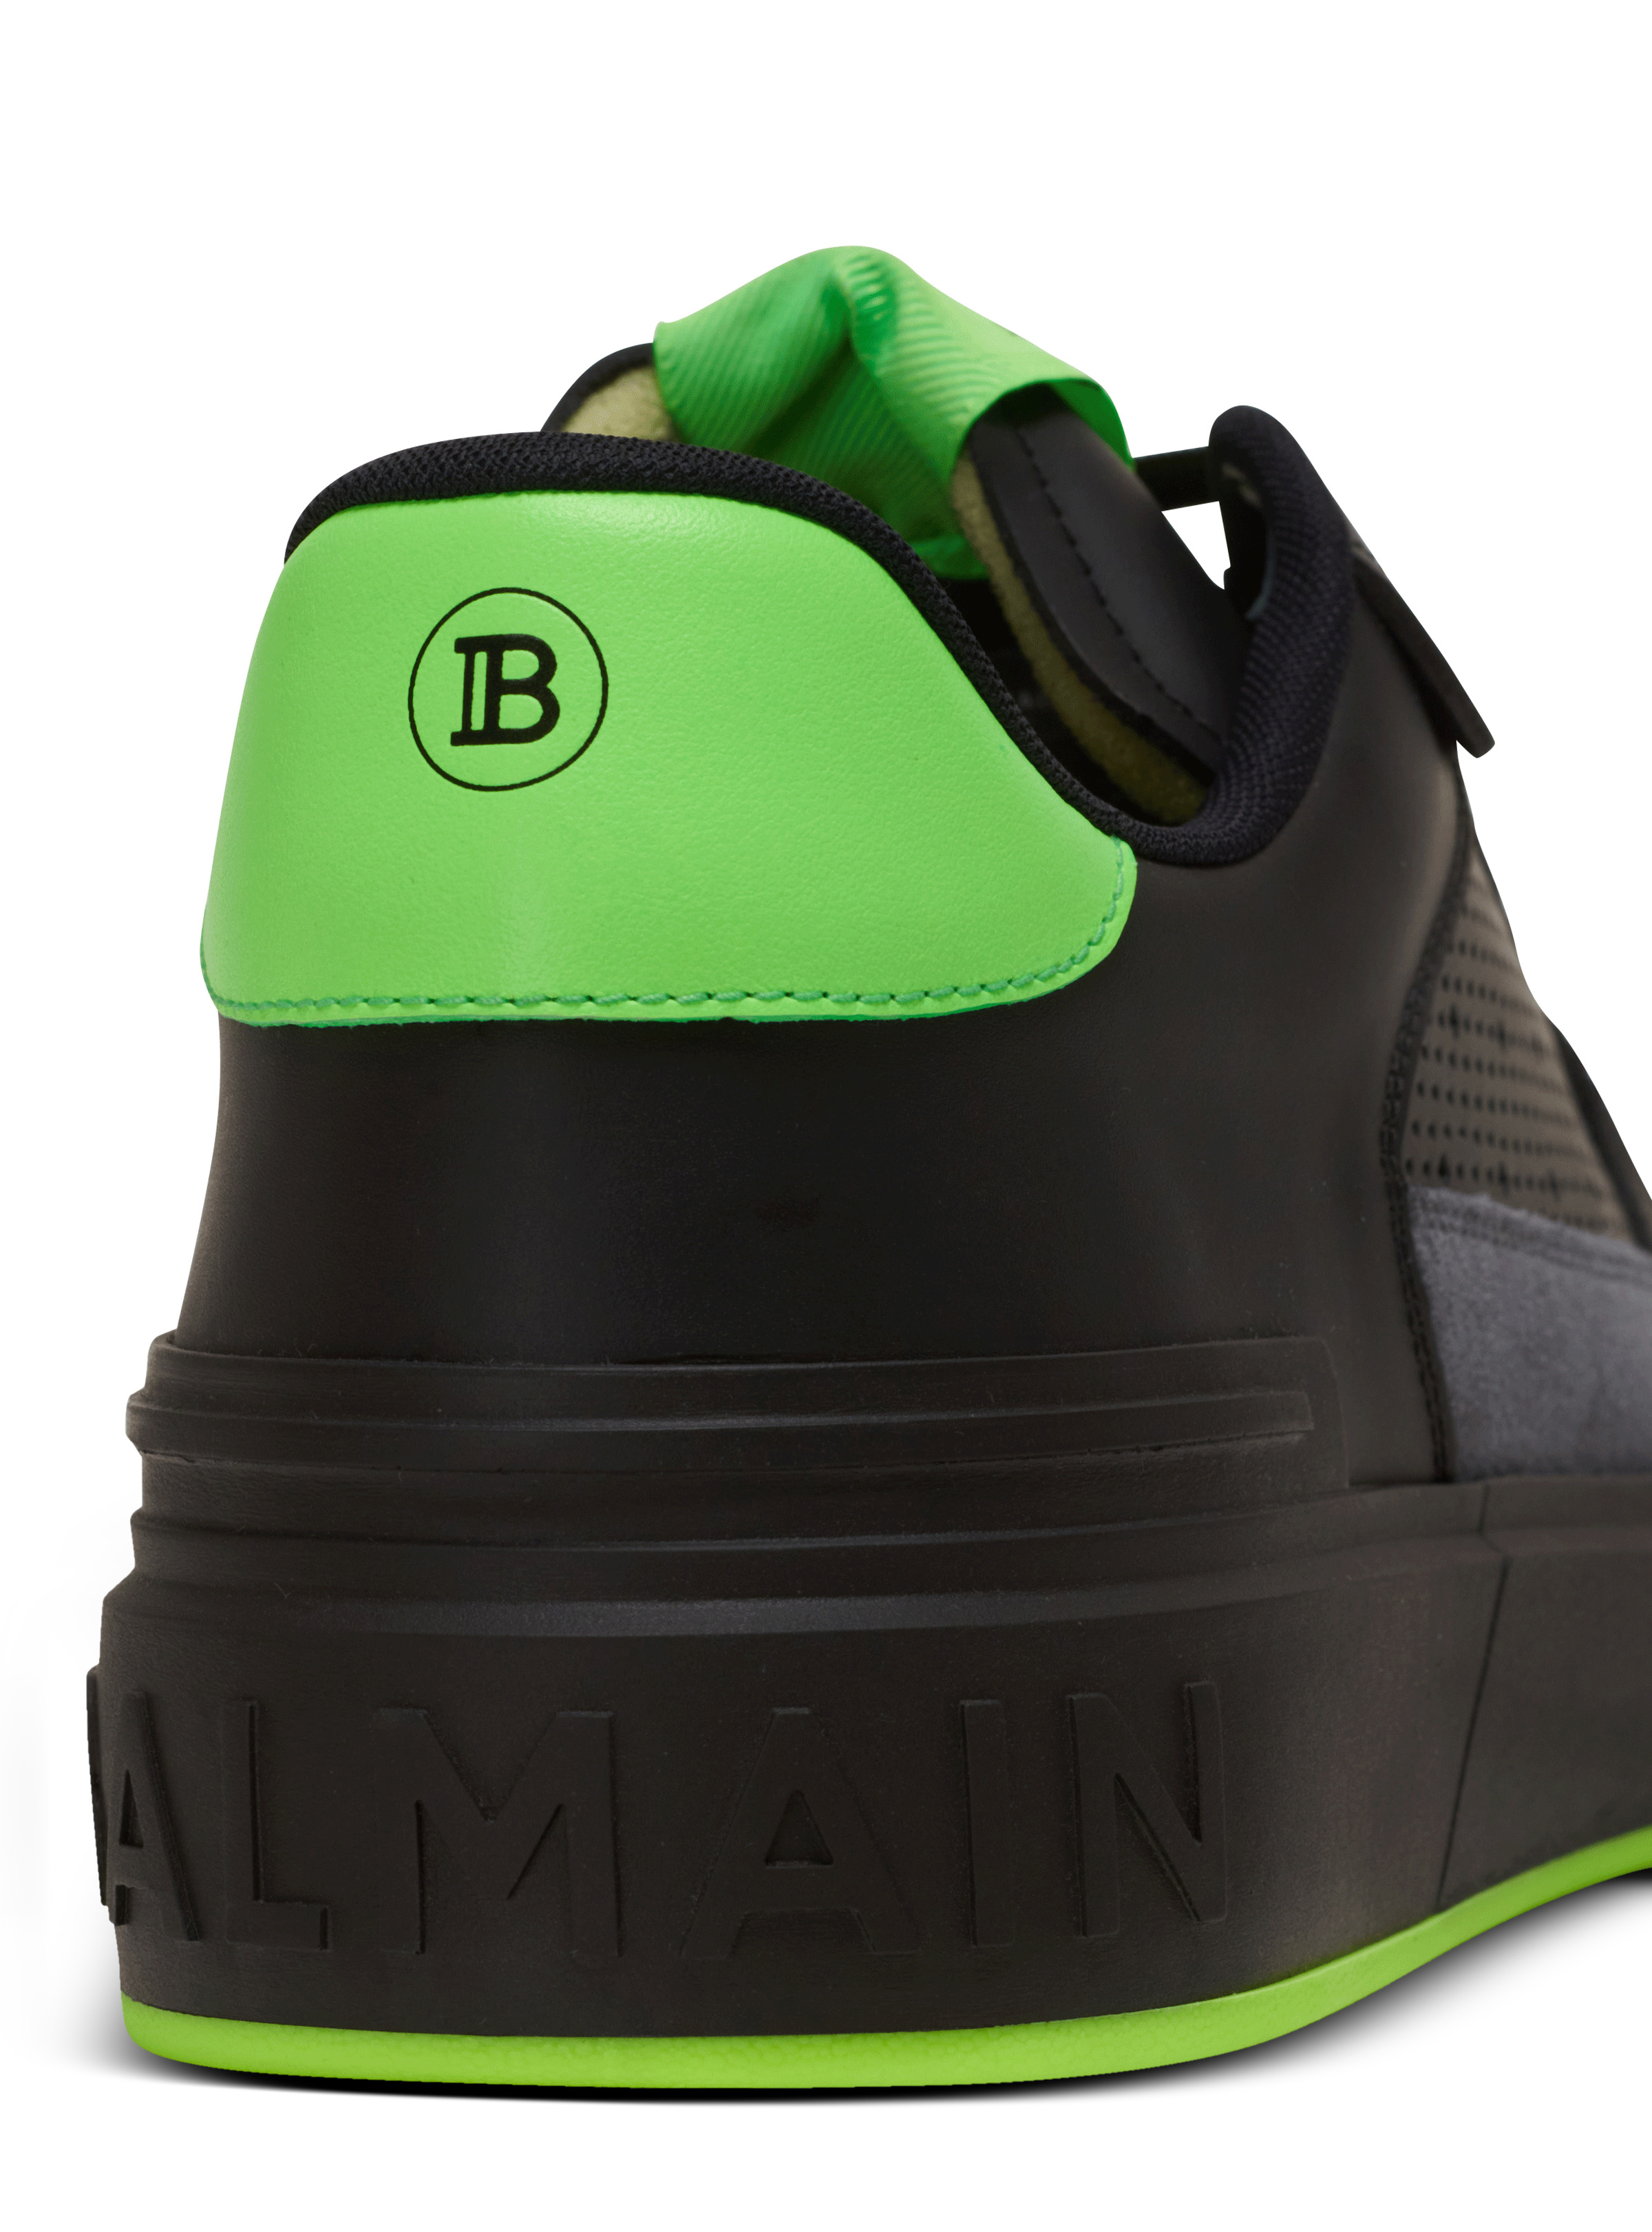 B-Court Flip trainers in calfskin and suede - 9